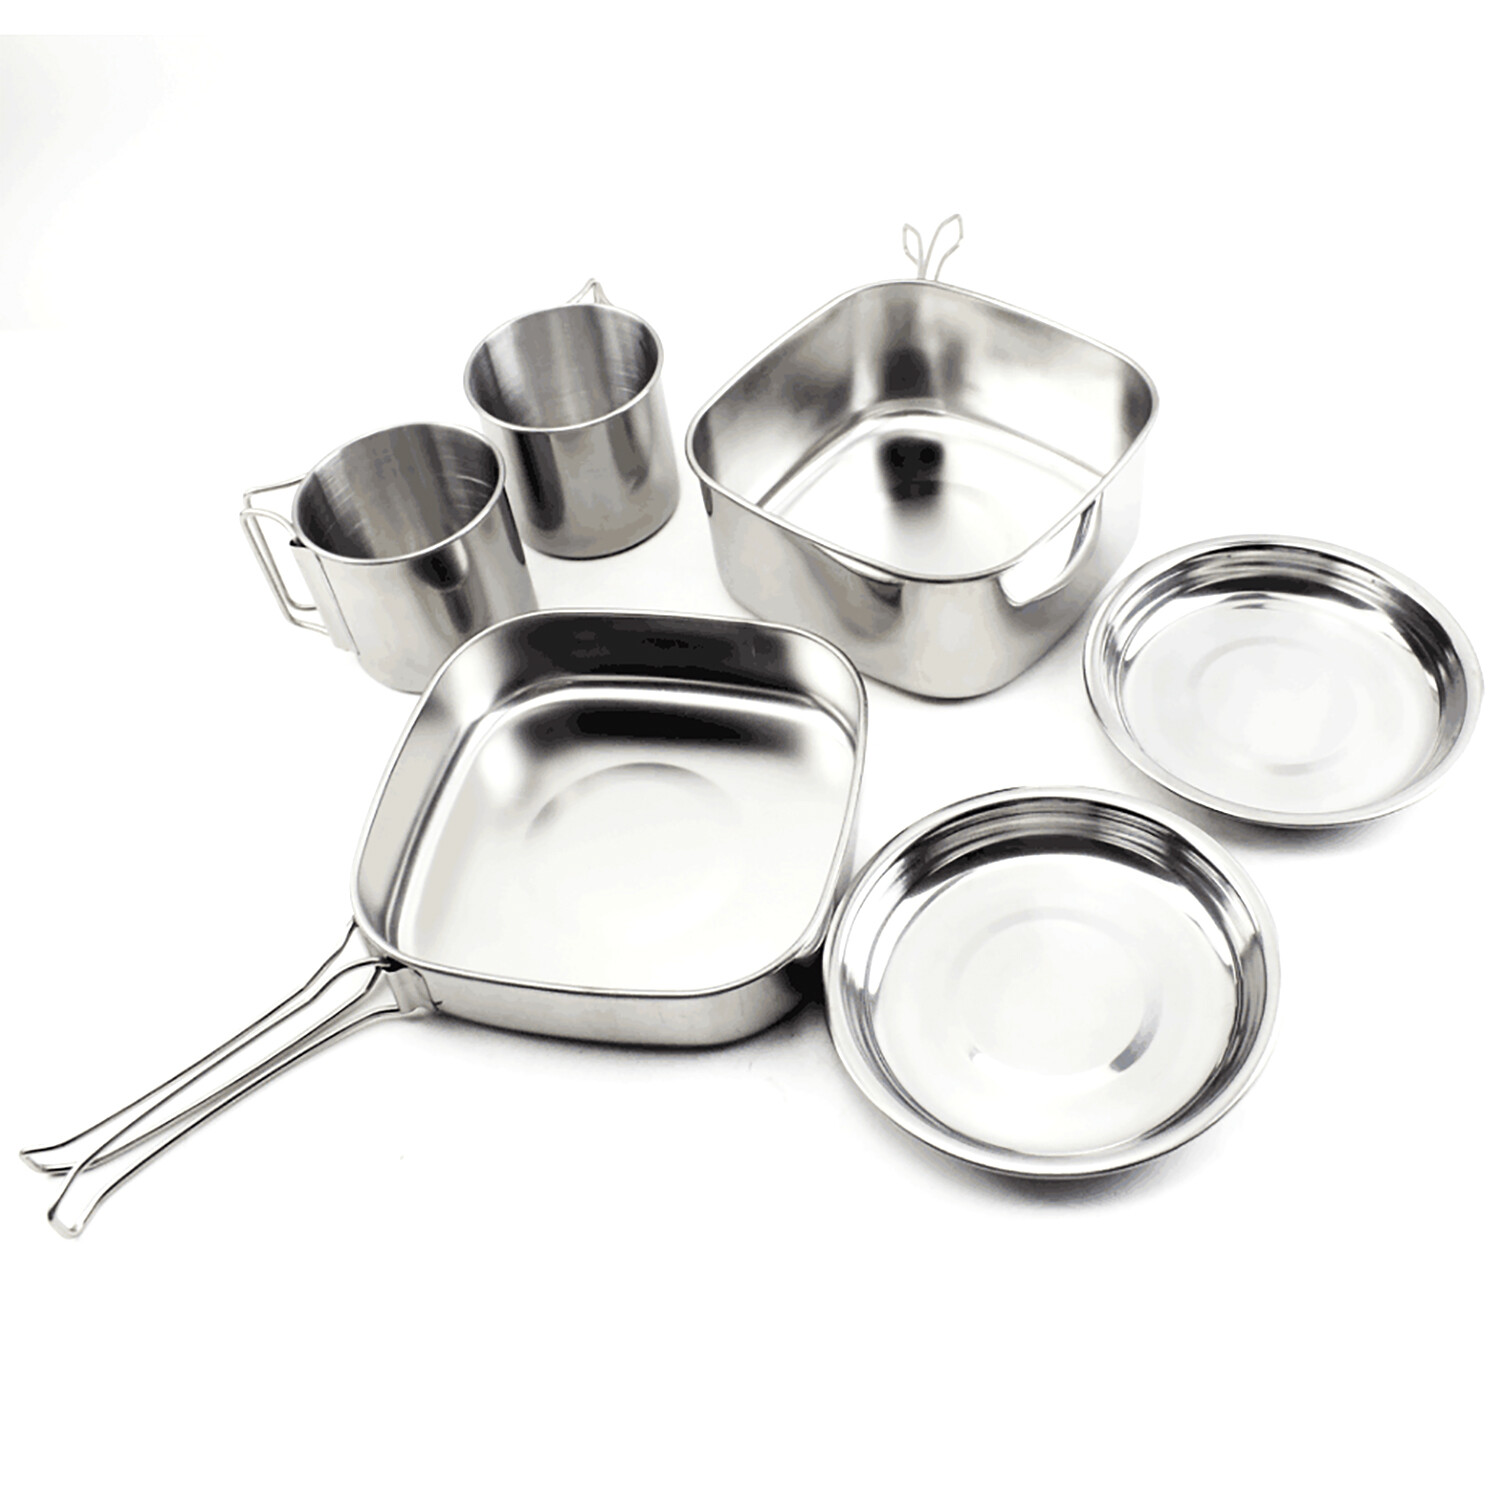 Active Sport Stainless Steel Cook Set - Silver Image